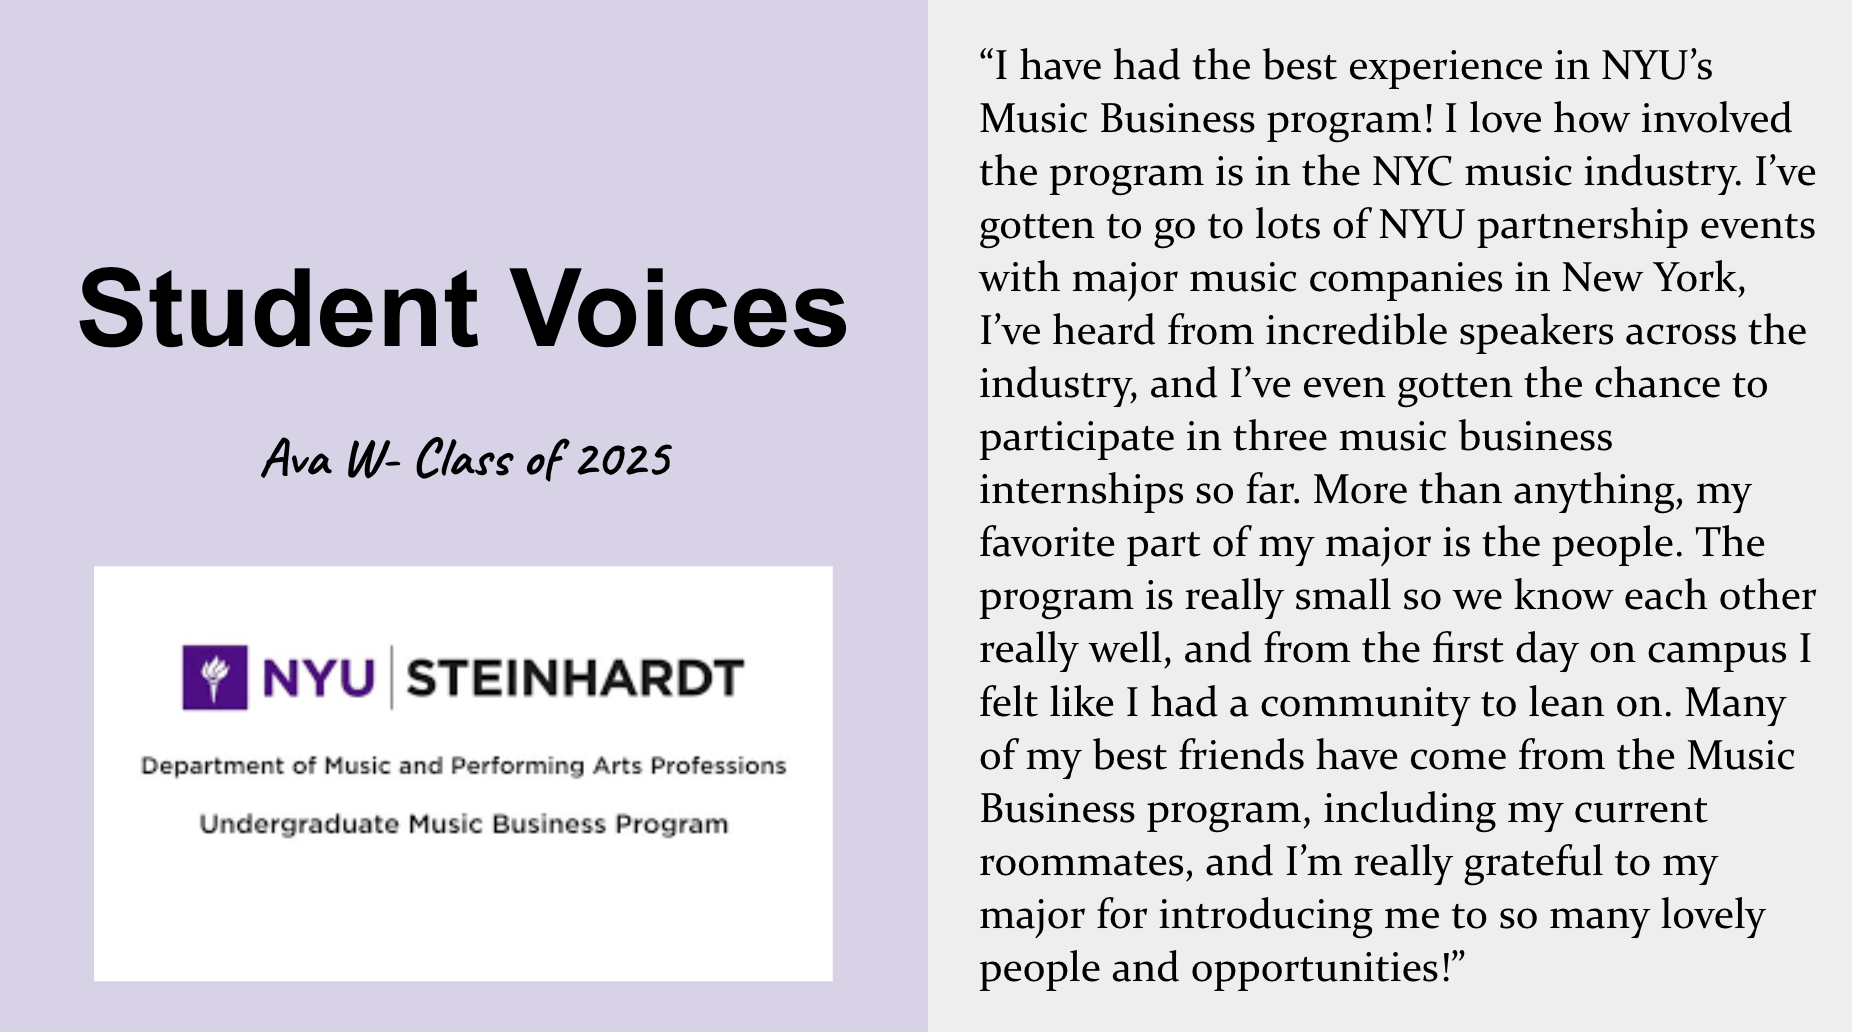 Student voice about the Steinhardt Music Business major. Ava W., Class of 2025, says “I have had the best experience in NYU’s Music Business program! I love how involved the program is in the NYC music industry. I’ve gotten to go to lots of NYU partnership events with major music companies in New York, I’ve heard from incredible speakers across the industry, and I’ve even gotten the chance to participate in three music business internships so far. More than anything, my favorite part of my major is the people. The program is really small so we know each other really well, and from the first day on campus I felt like I had a community to lean on. Many of my best friends have come from the Music Business program, including my current roommates, and I’m really grateful to my major for introducing me to so many lovely people and opportunities.”